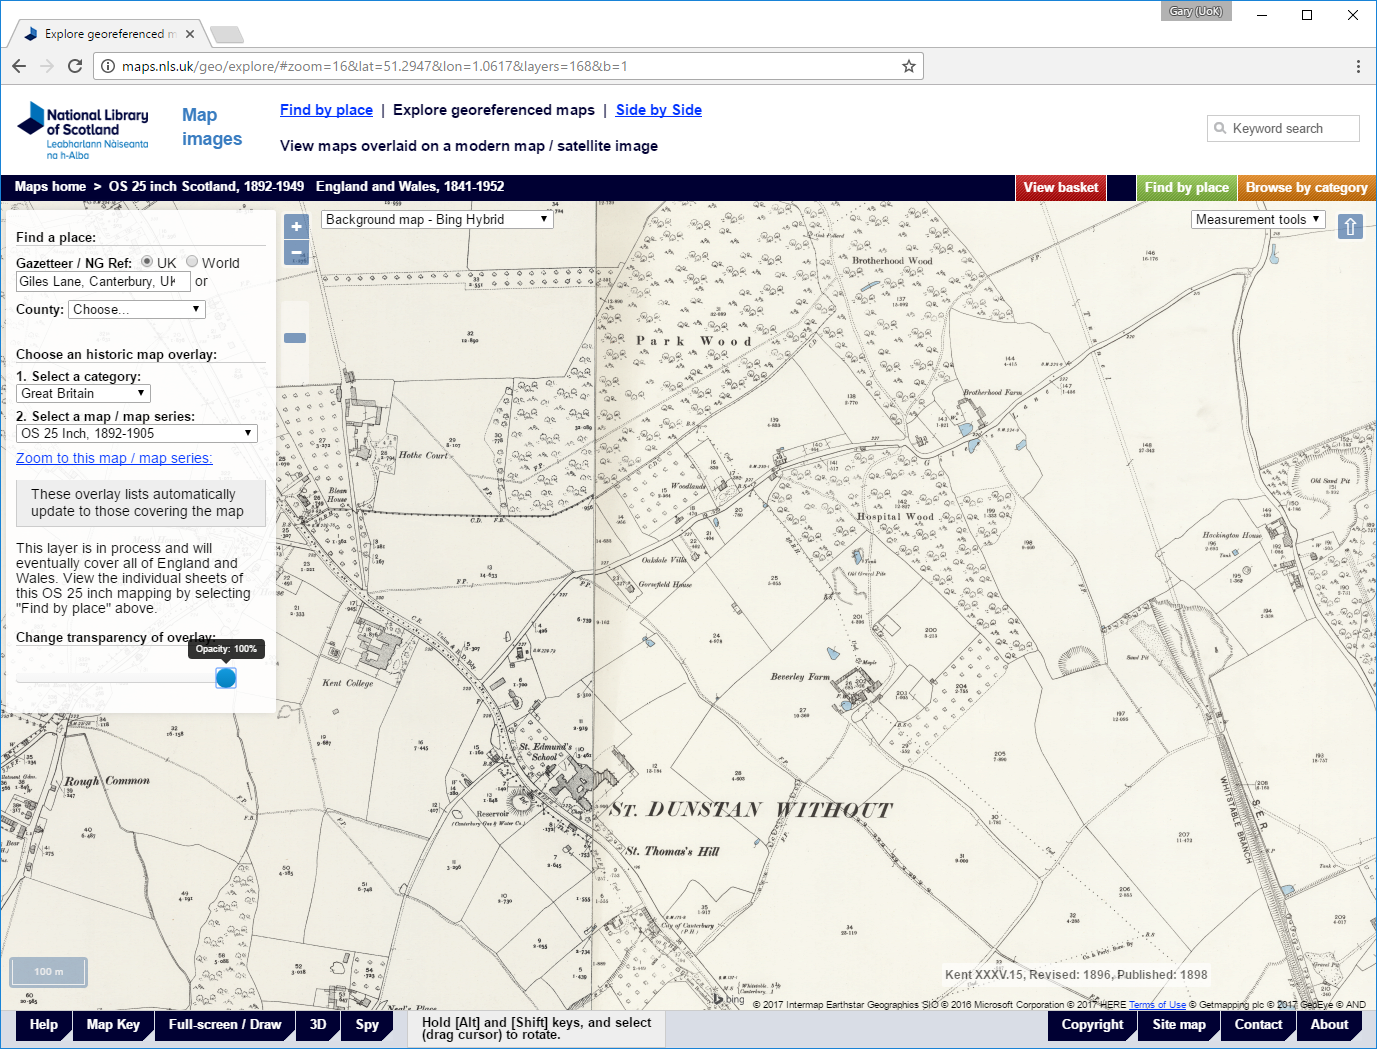 National Library of Scotland Georeferenced Map